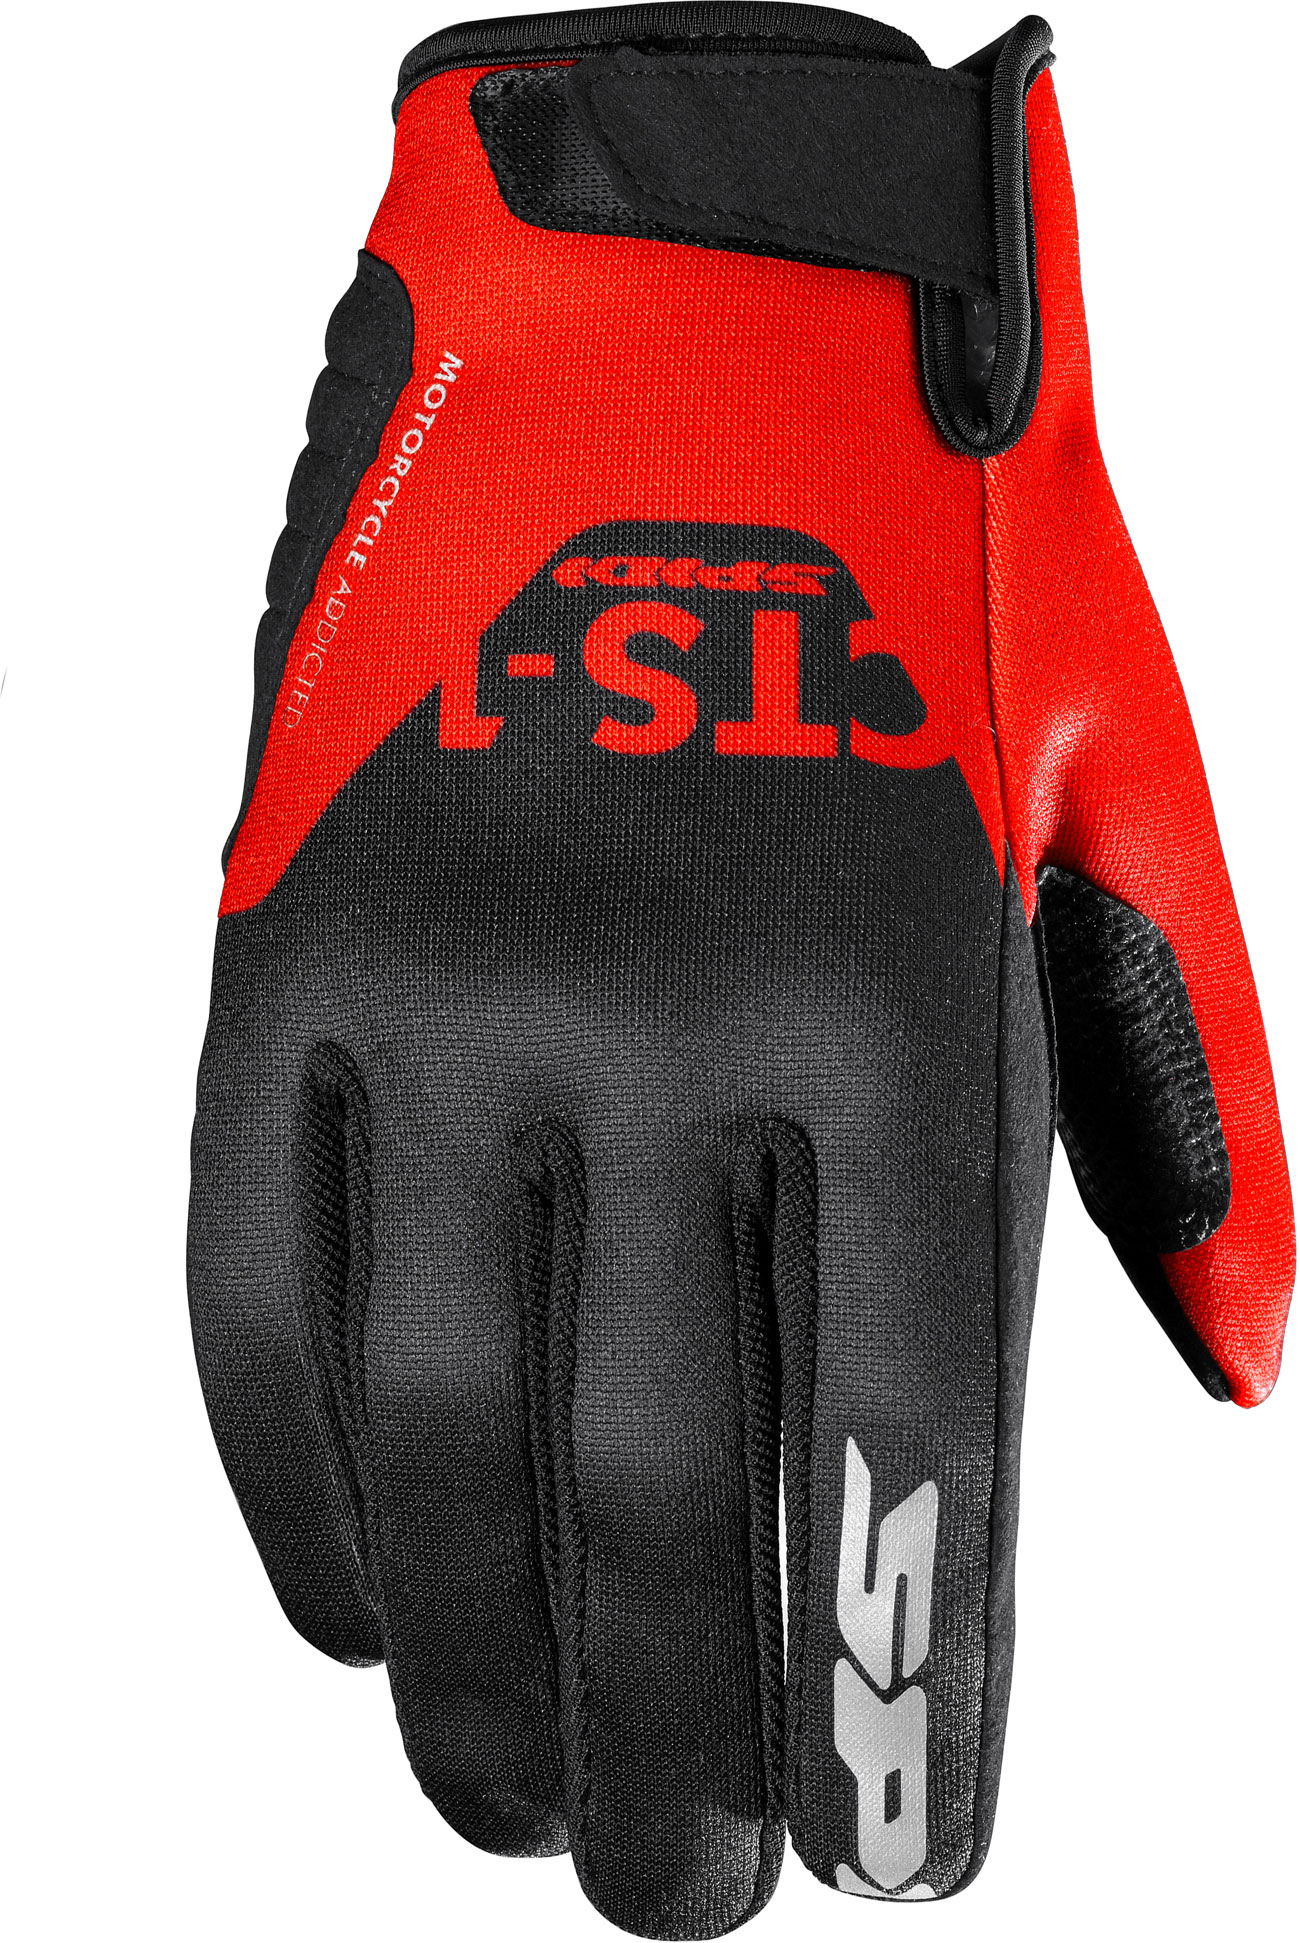 Spidi CTS-1, gloves , color: Black/Red , size: XXL